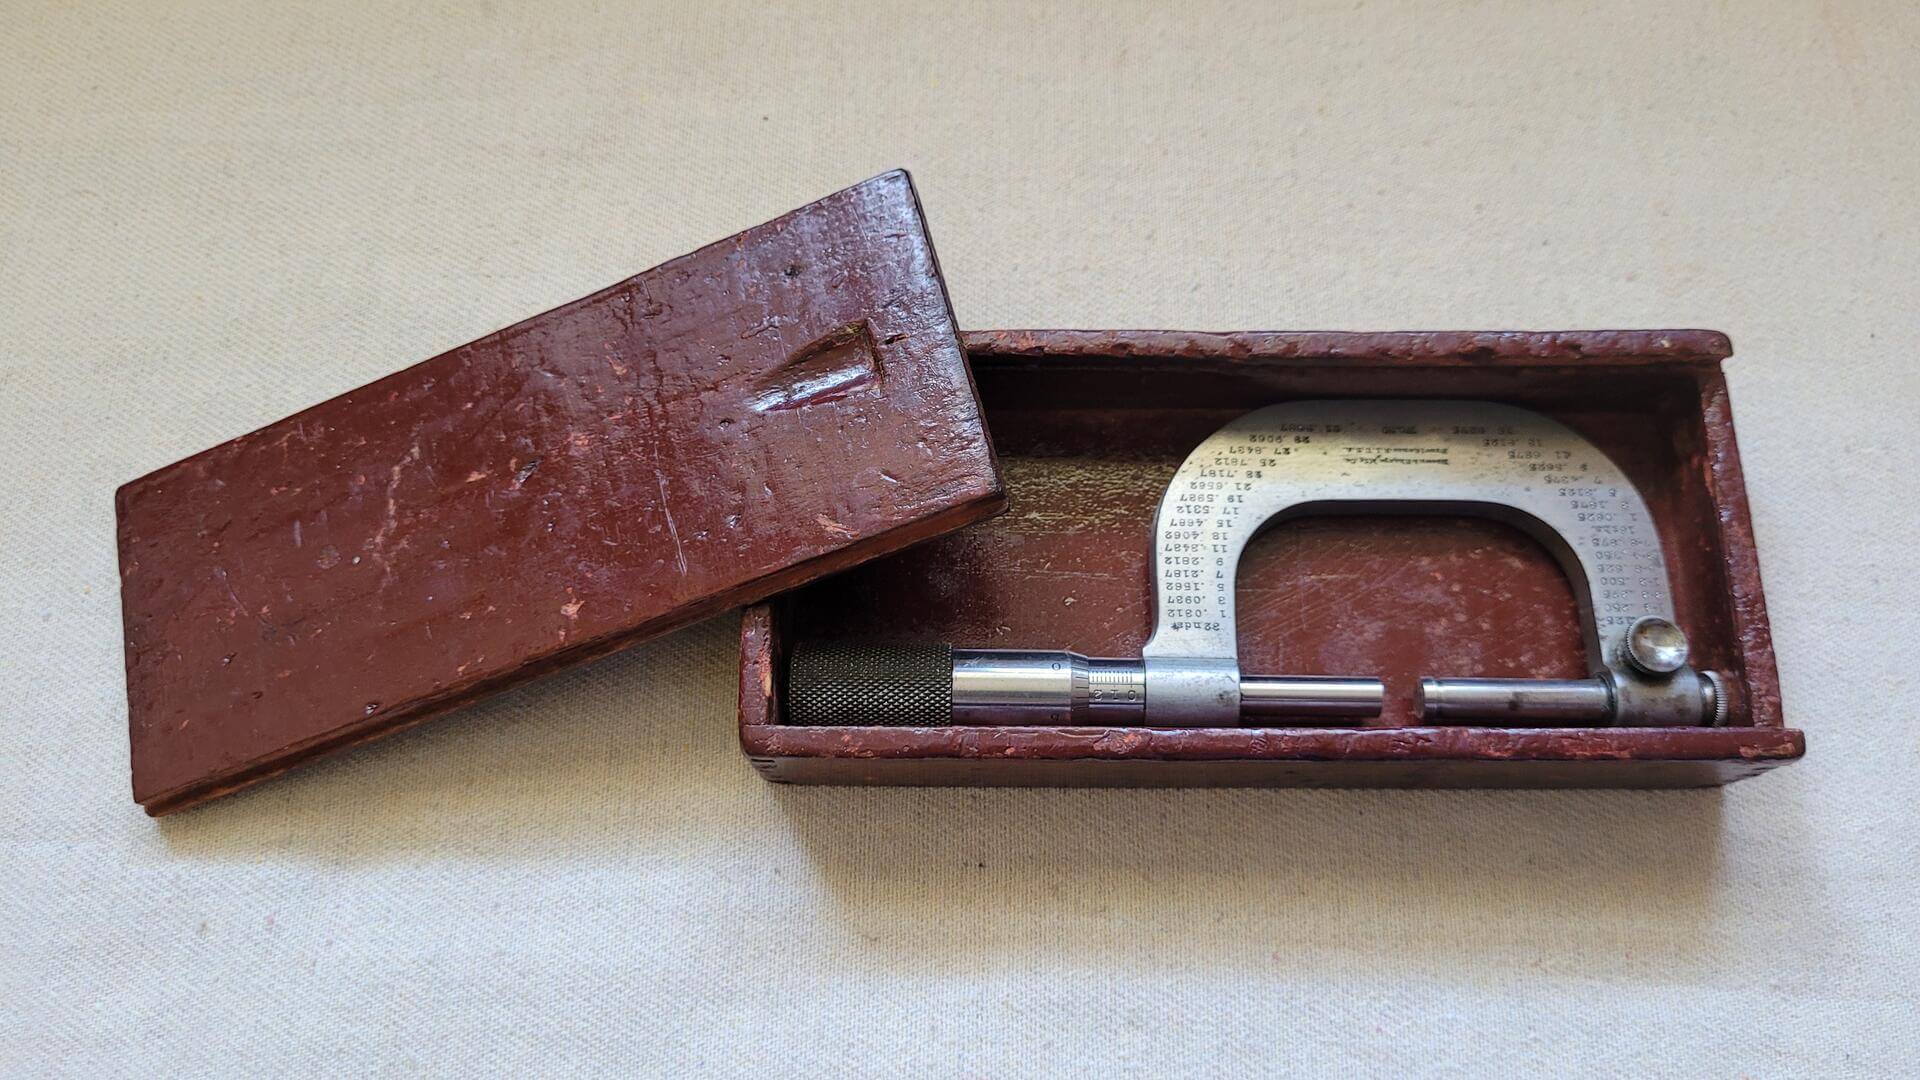 Antique Browne & Sharp Mfg Co No. 30 Micrometer Pat. Nov 6 1894 Providence RI with original case - Vintage made in USA collectible machinist measuring tools